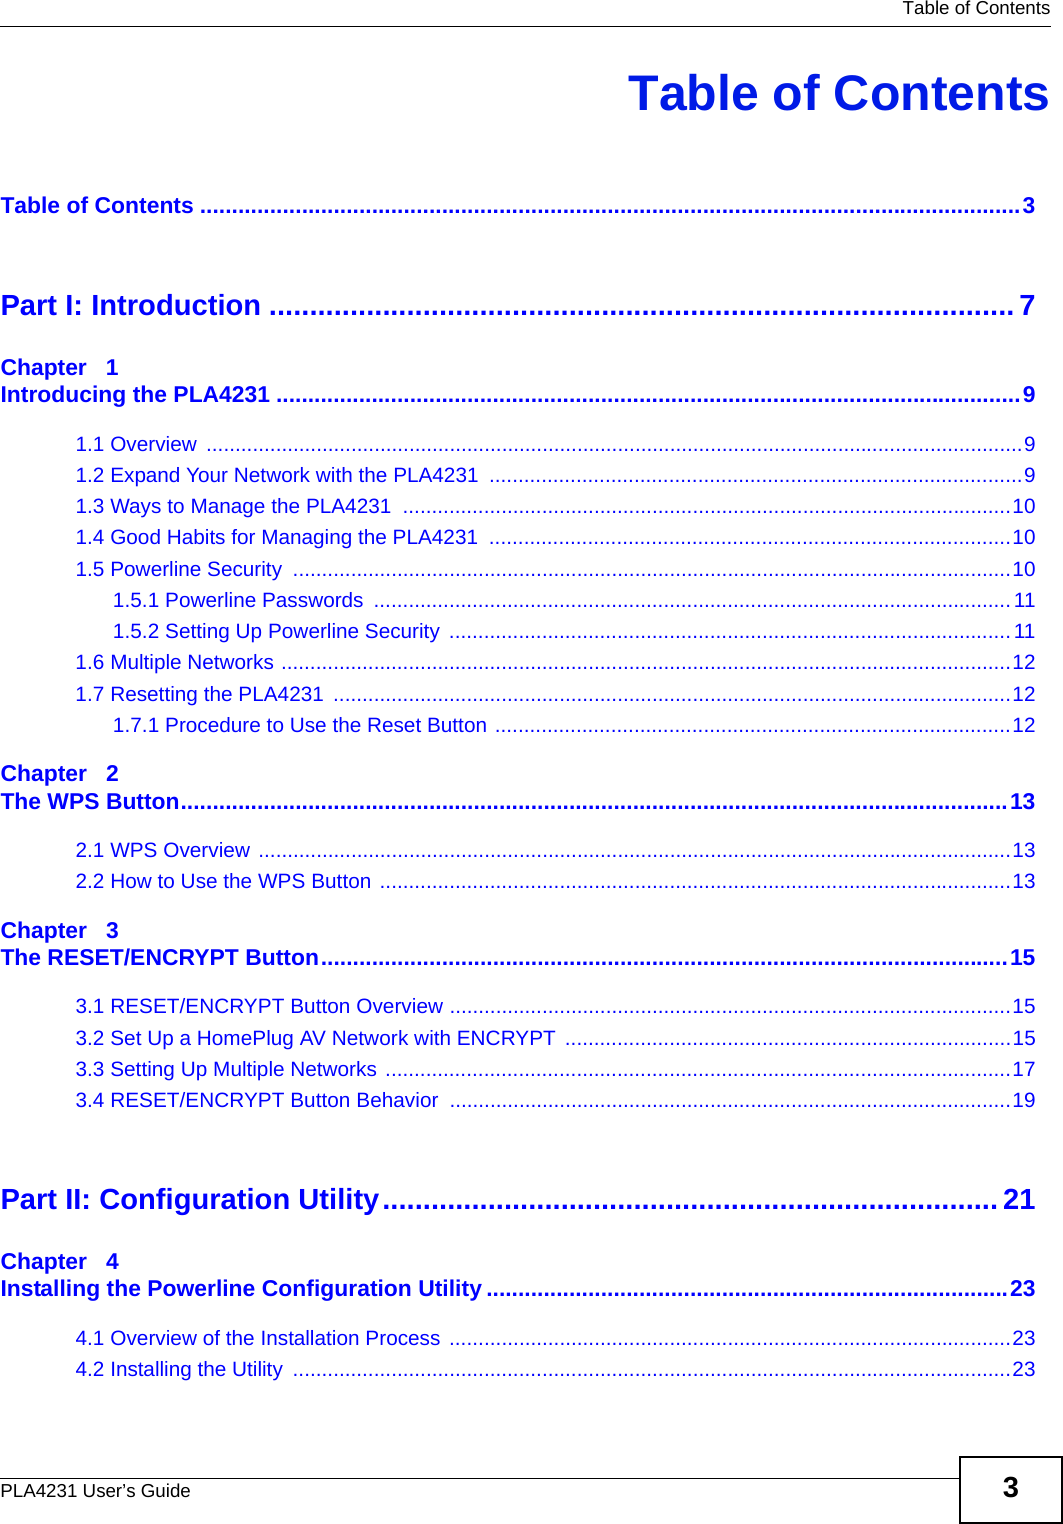   Table of ContentsPLA4231 User’s Guide 3Table of ContentsTable of Contents .................................................................................................................................3Part I: Introduction ............................................................................................7Chapter   1Introducing the PLA4231 .....................................................................................................................91.1 Overview  .............................................................................................................................................91.2 Expand Your Network with the PLA4231  ............................................................................................91.3 Ways to Manage the PLA4231  .........................................................................................................101.4 Good Habits for Managing the PLA4231  ..........................................................................................101.5 Powerline Security  ............................................................................................................................101.5.1 Powerline Passwords  ..............................................................................................................111.5.2 Setting Up Powerline Security  .................................................................................................111.6 Multiple Networks ..............................................................................................................................121.7 Resetting the PLA4231  .....................................................................................................................121.7.1 Procedure to Use the Reset Button .........................................................................................12Chapter   2The WPS Button..................................................................................................................................132.1 WPS Overview ..................................................................................................................................132.2 How to Use the WPS Button .............................................................................................................13Chapter   3The RESET/ENCRYPT Button............................................................................................................153.1 RESET/ENCRYPT Button Overview .................................................................................................153.2 Set Up a HomePlug AV Network with ENCRYPT .............................................................................153.3 Setting Up Multiple Networks ............................................................................................................173.4 RESET/ENCRYPT Button Behavior .................................................................................................19Part II: Configuration Utility............................................................................ 21Chapter   4Installing the Powerline Configuration Utility ..................................................................................234.1 Overview of the Installation Process  .................................................................................................234.2 Installing the Utility  ............................................................................................................................23